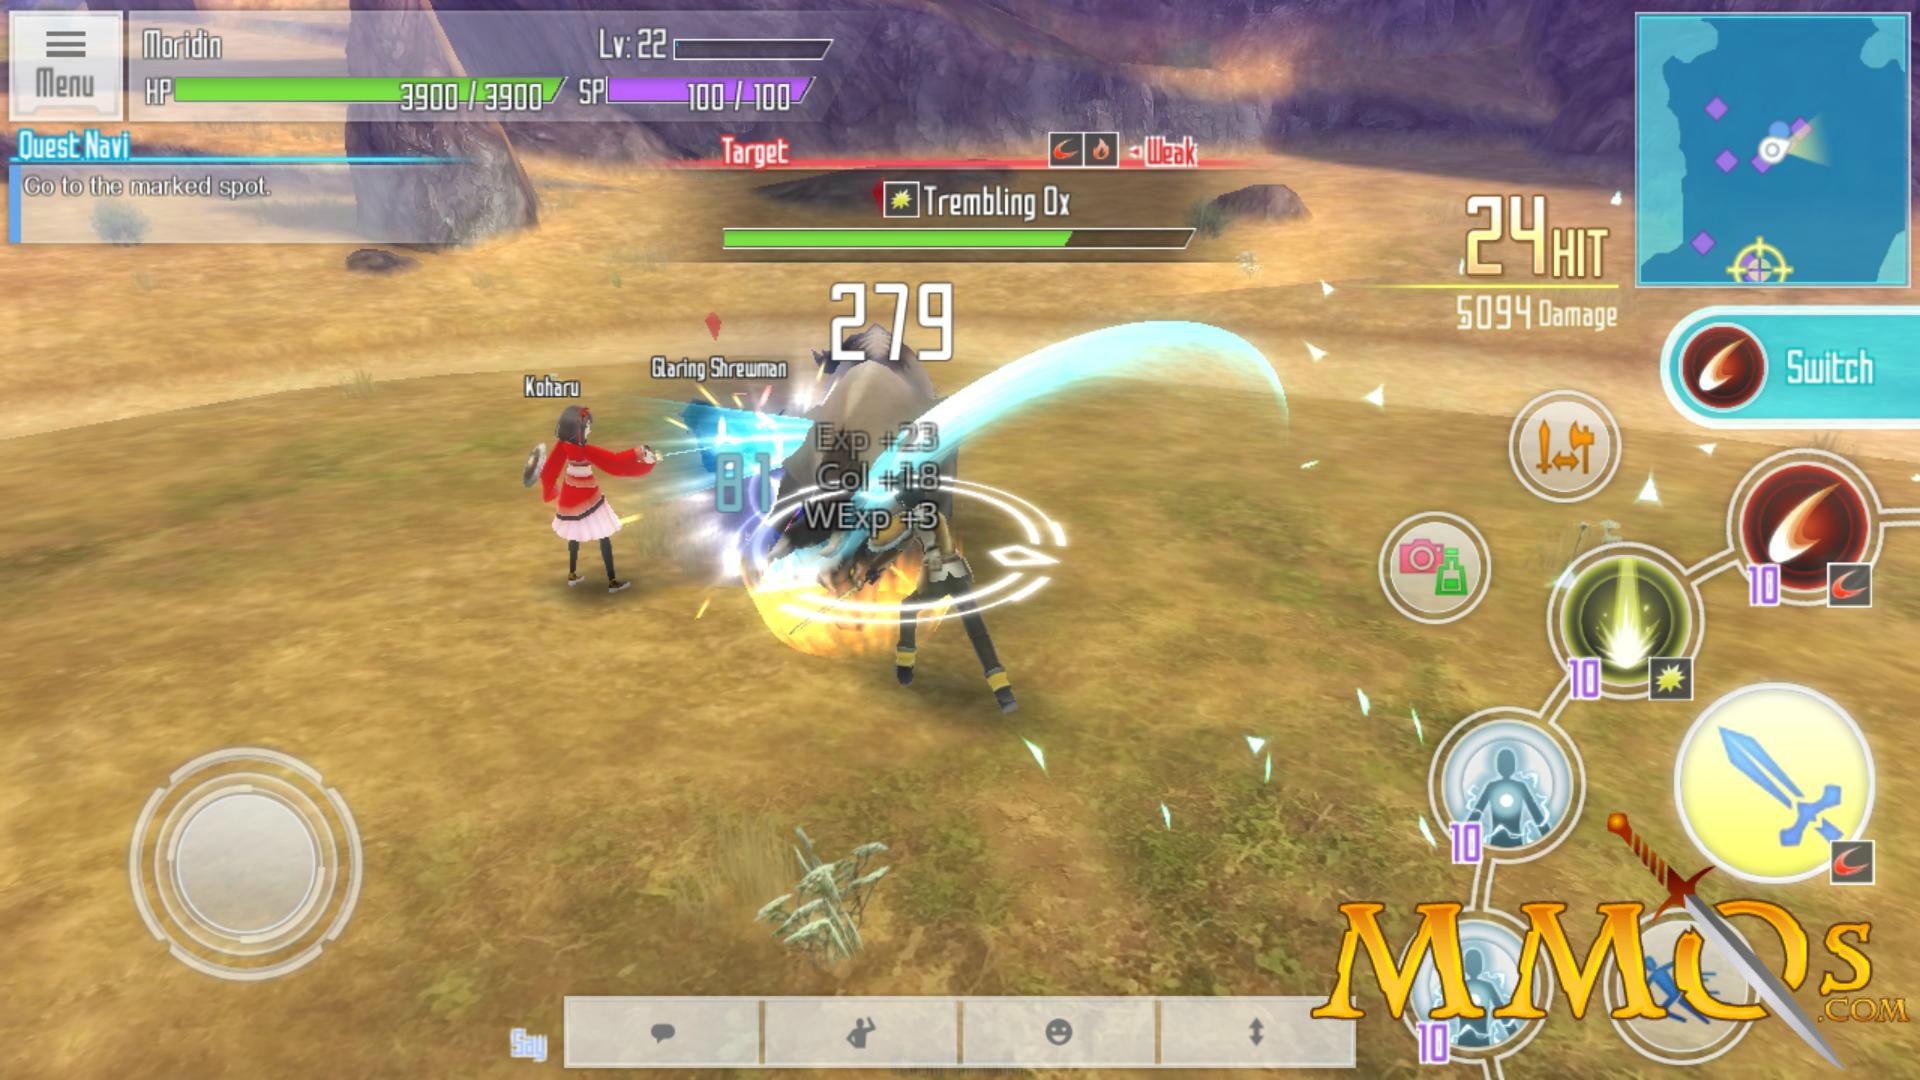 Sword Art Online: Integral Factor English Gameplay Android / iOS (Open  World MMORPG) 